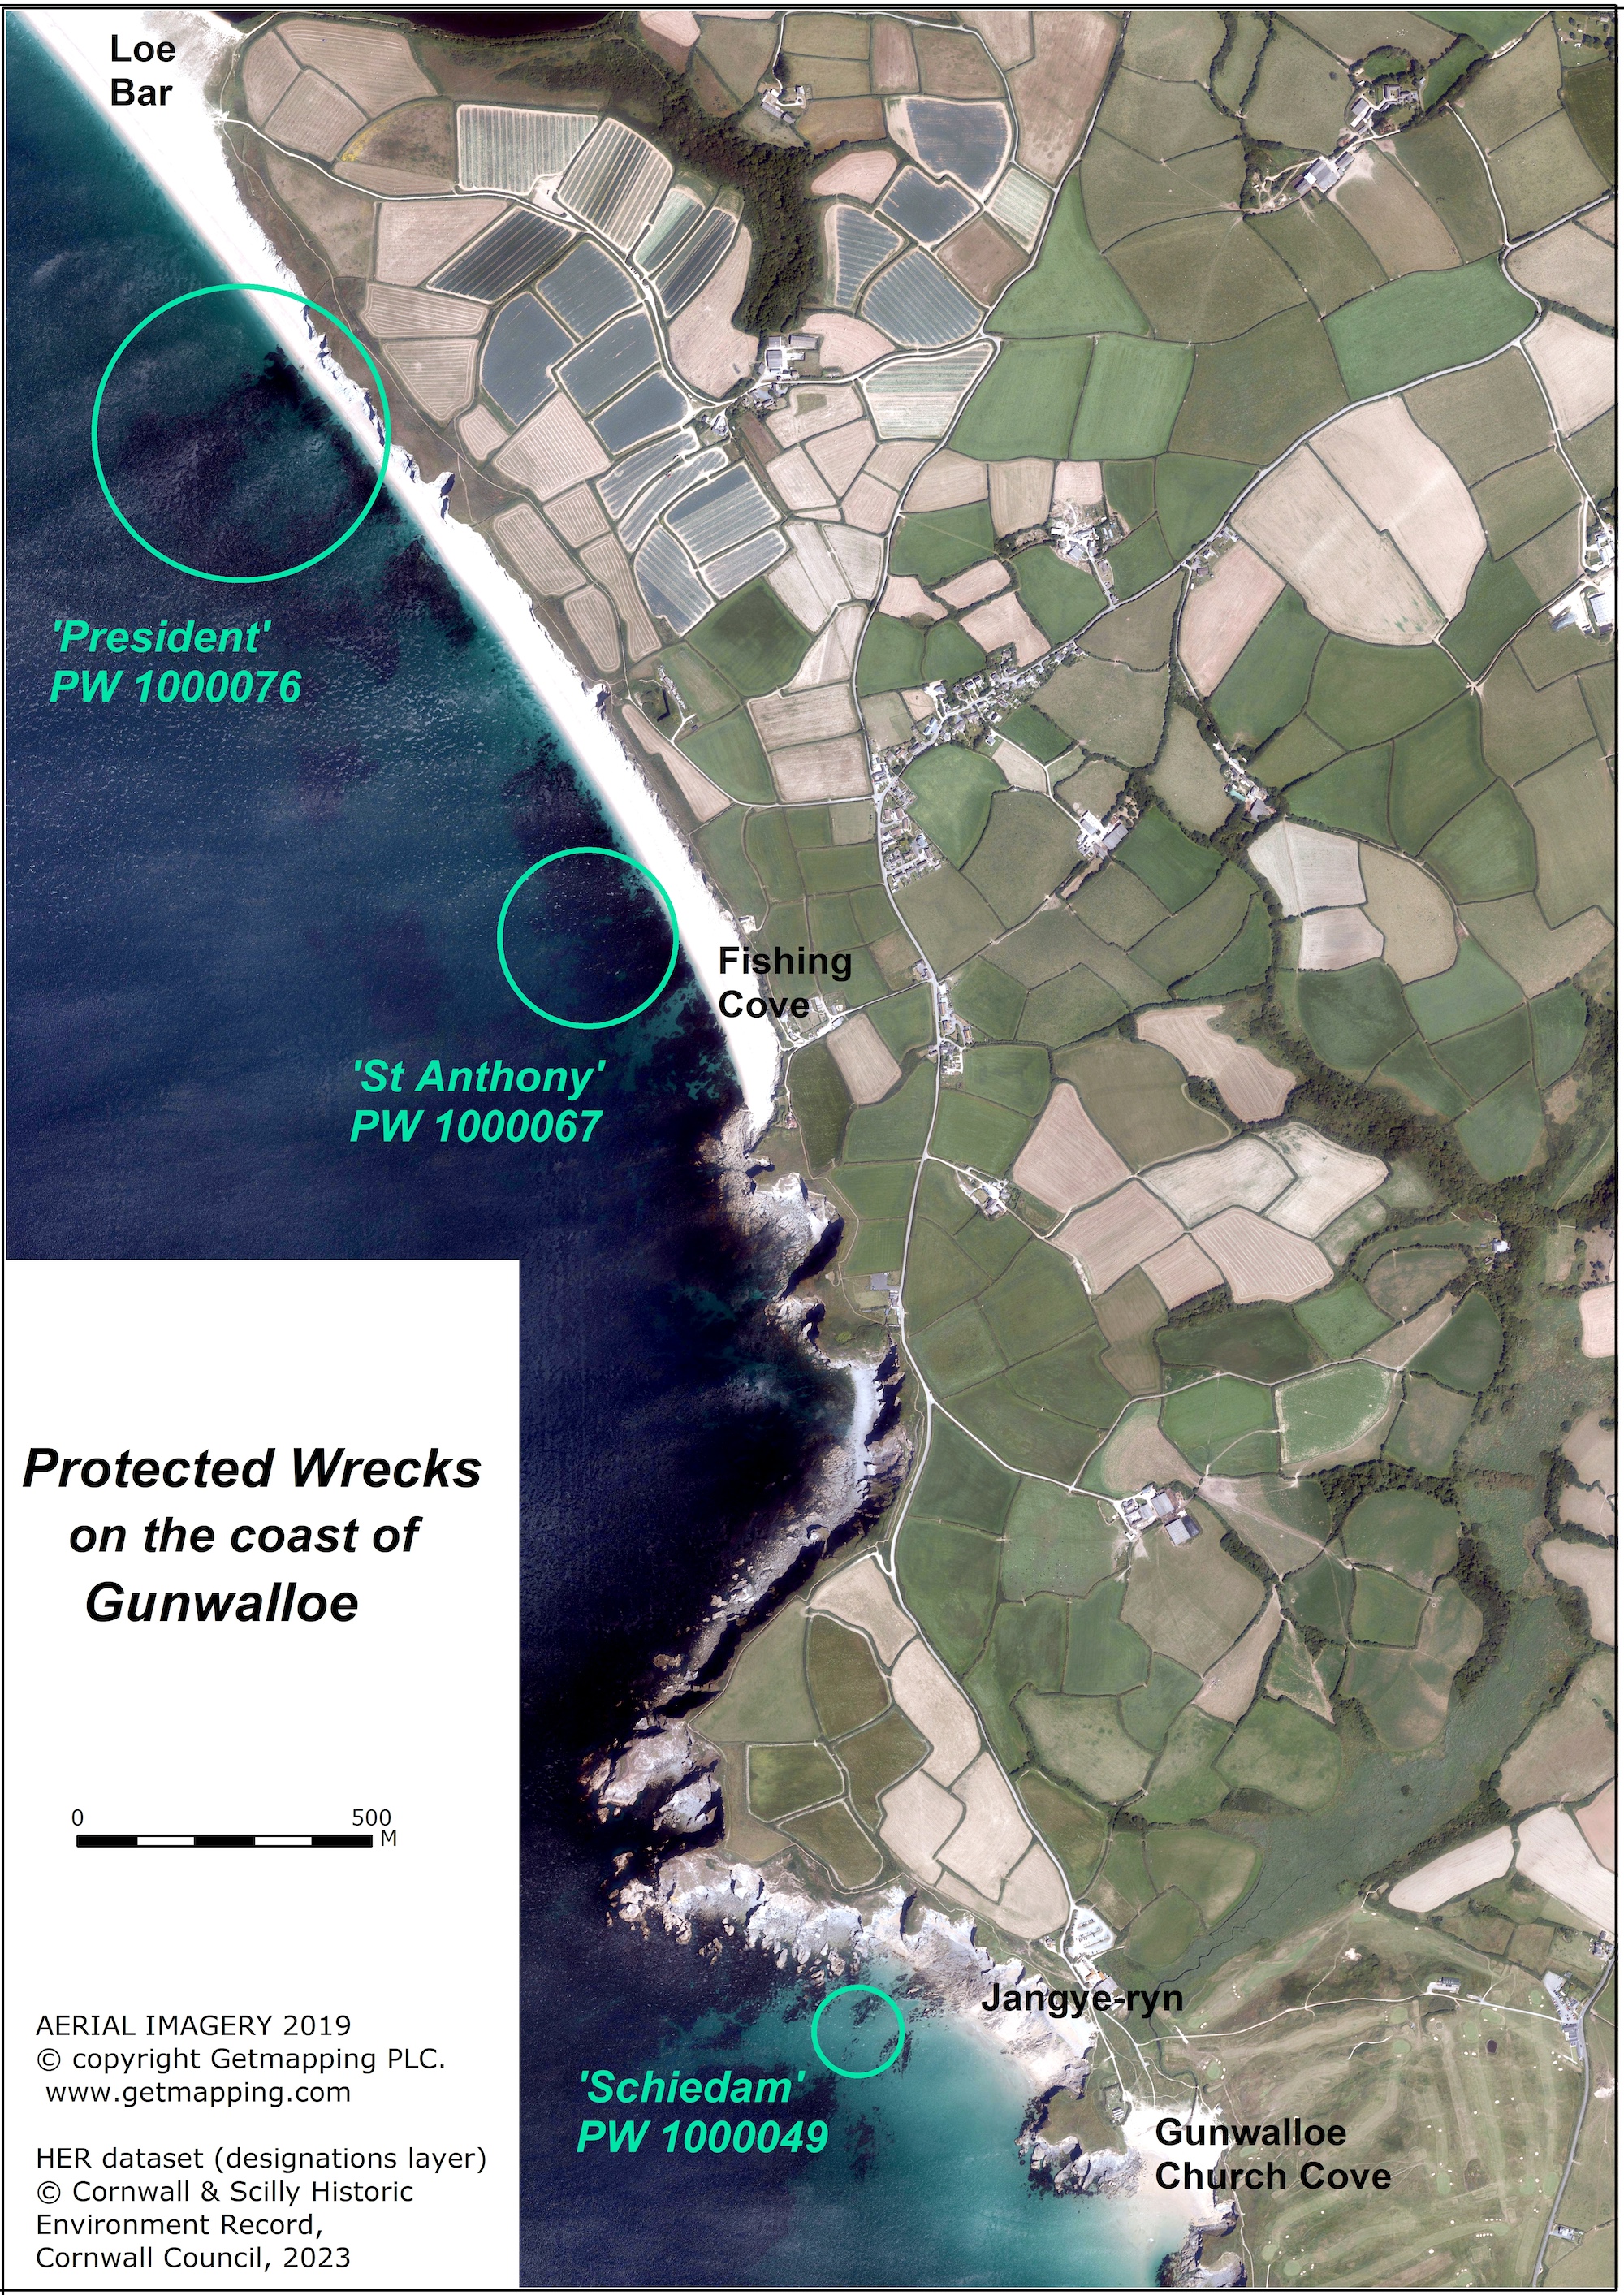 A satellite aerial view of the coast around Gunwalloe. Circles mark the areas of the 3 Protected Wrecks. The largest, the President, and the St Anthony, lie off the very long white beach of Fishing Cove, near Loe Bar. The smaller Schiedam site is to the south, close to Jangye-ryn near the church. The landscape all along this coast is rural, a patchwork of greens.